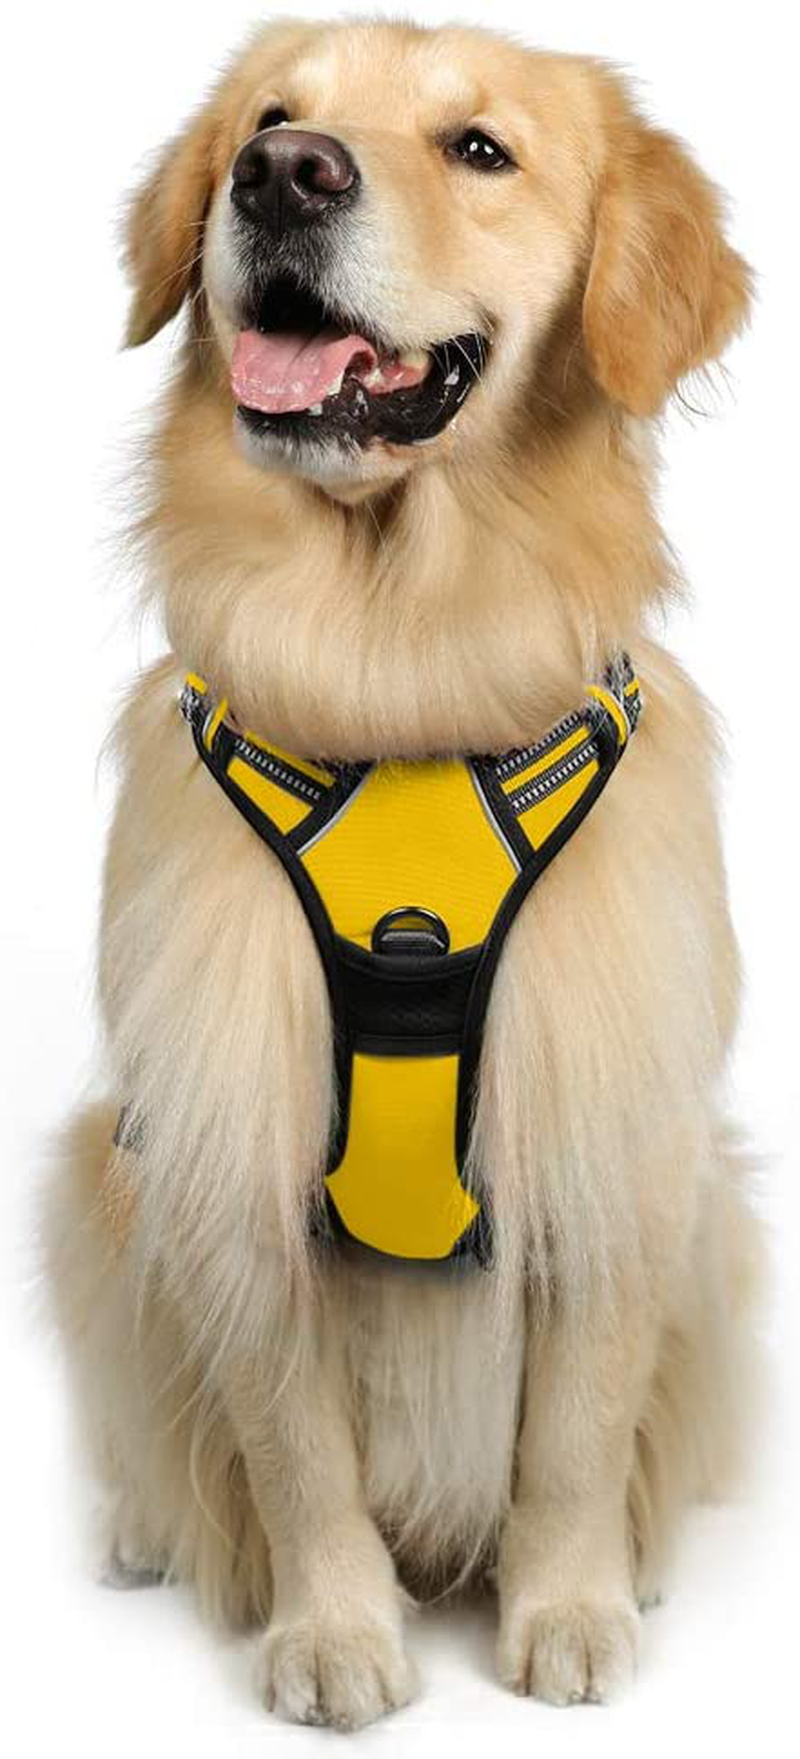 rabbitgoo Dog Harness, No-Pull Pet Harness with 2 Leash Clips, Adjustable Soft Padded Dog Vest, Reflective No-Choke Pet Oxford Vest with Easy Control Handle for Large Dogs, Black, XL  rabbitgoo Lemon Yellow Large 